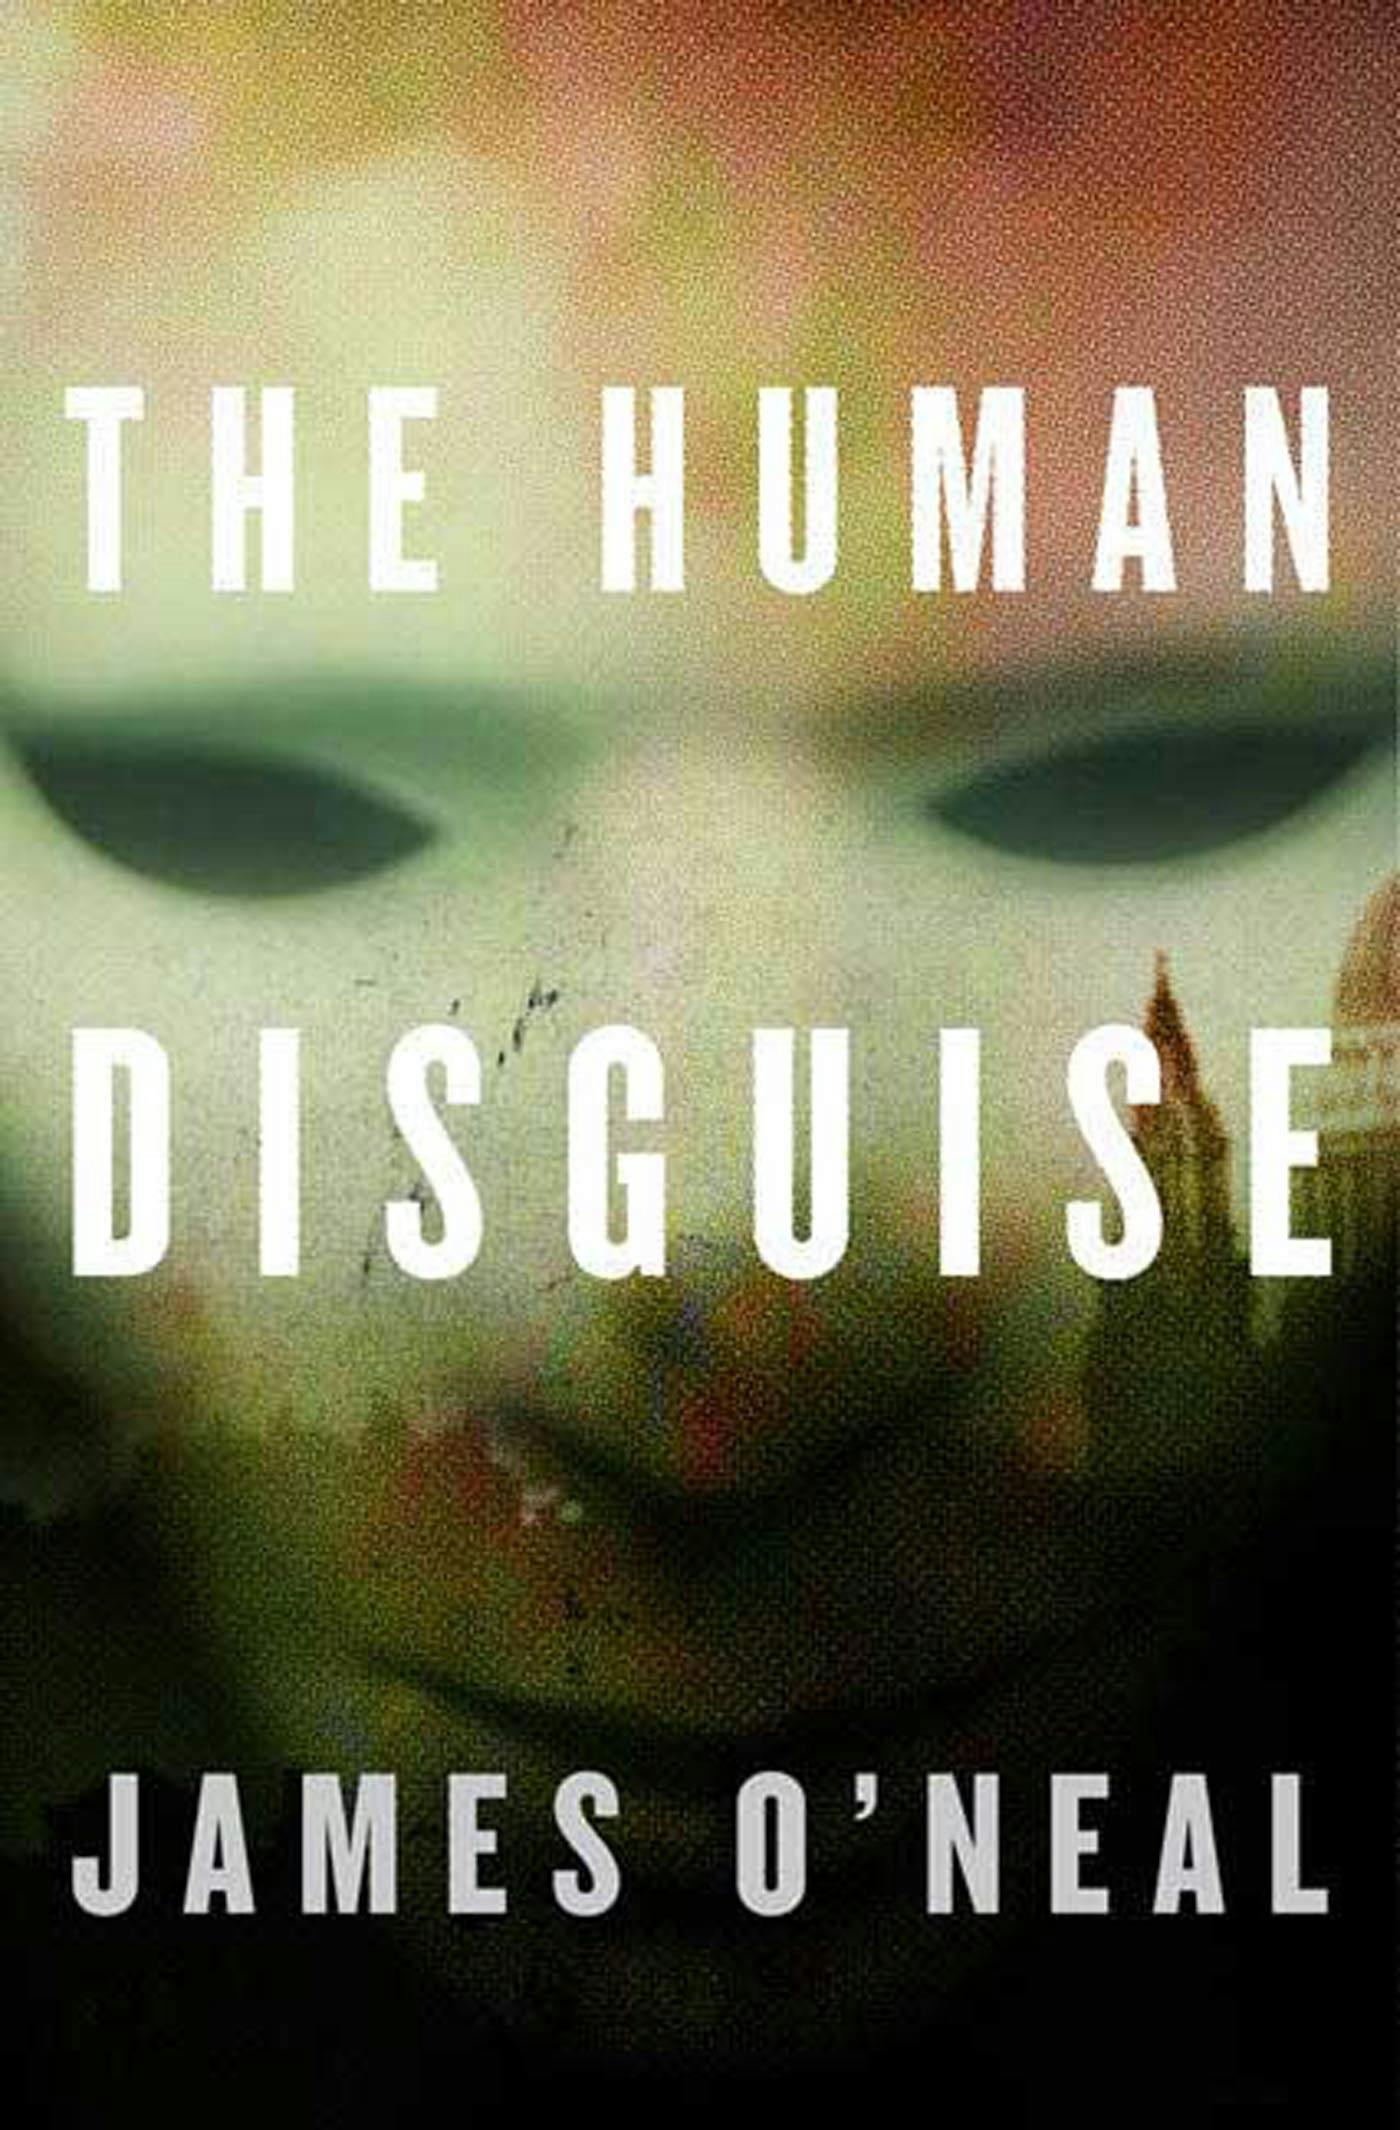 Image of The Human Disguise